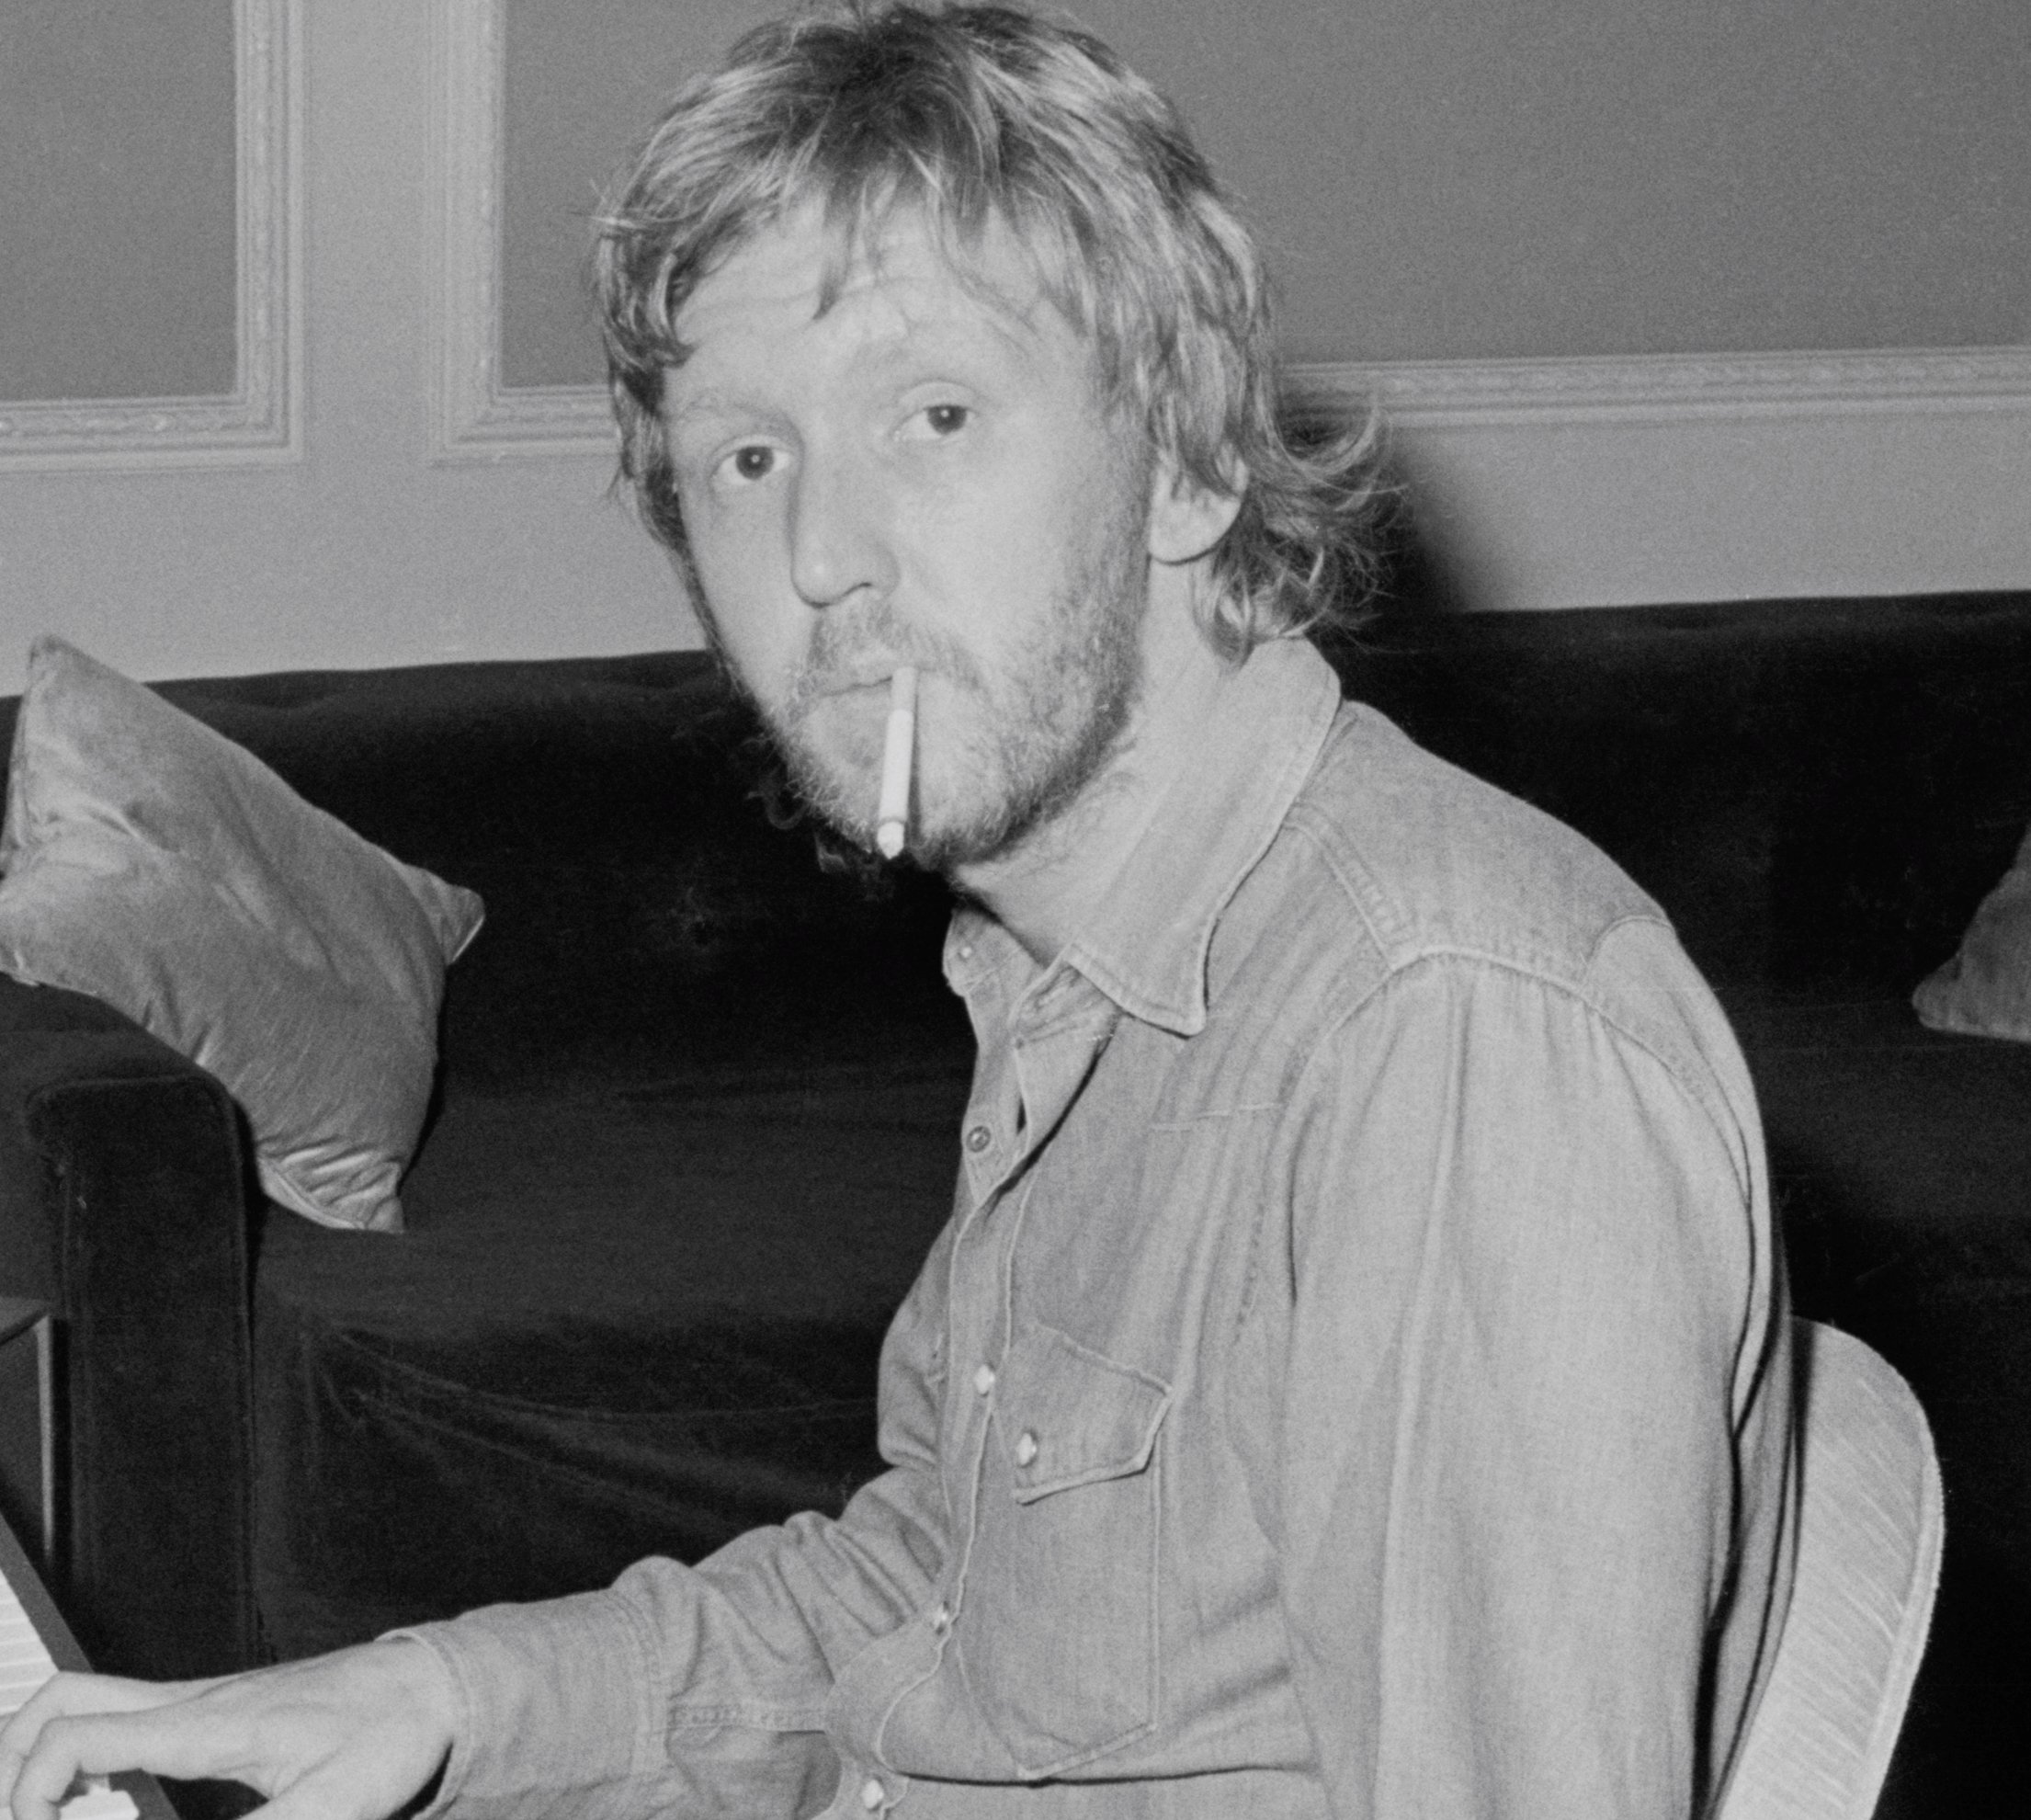 Harry Nilsson with a cigarette